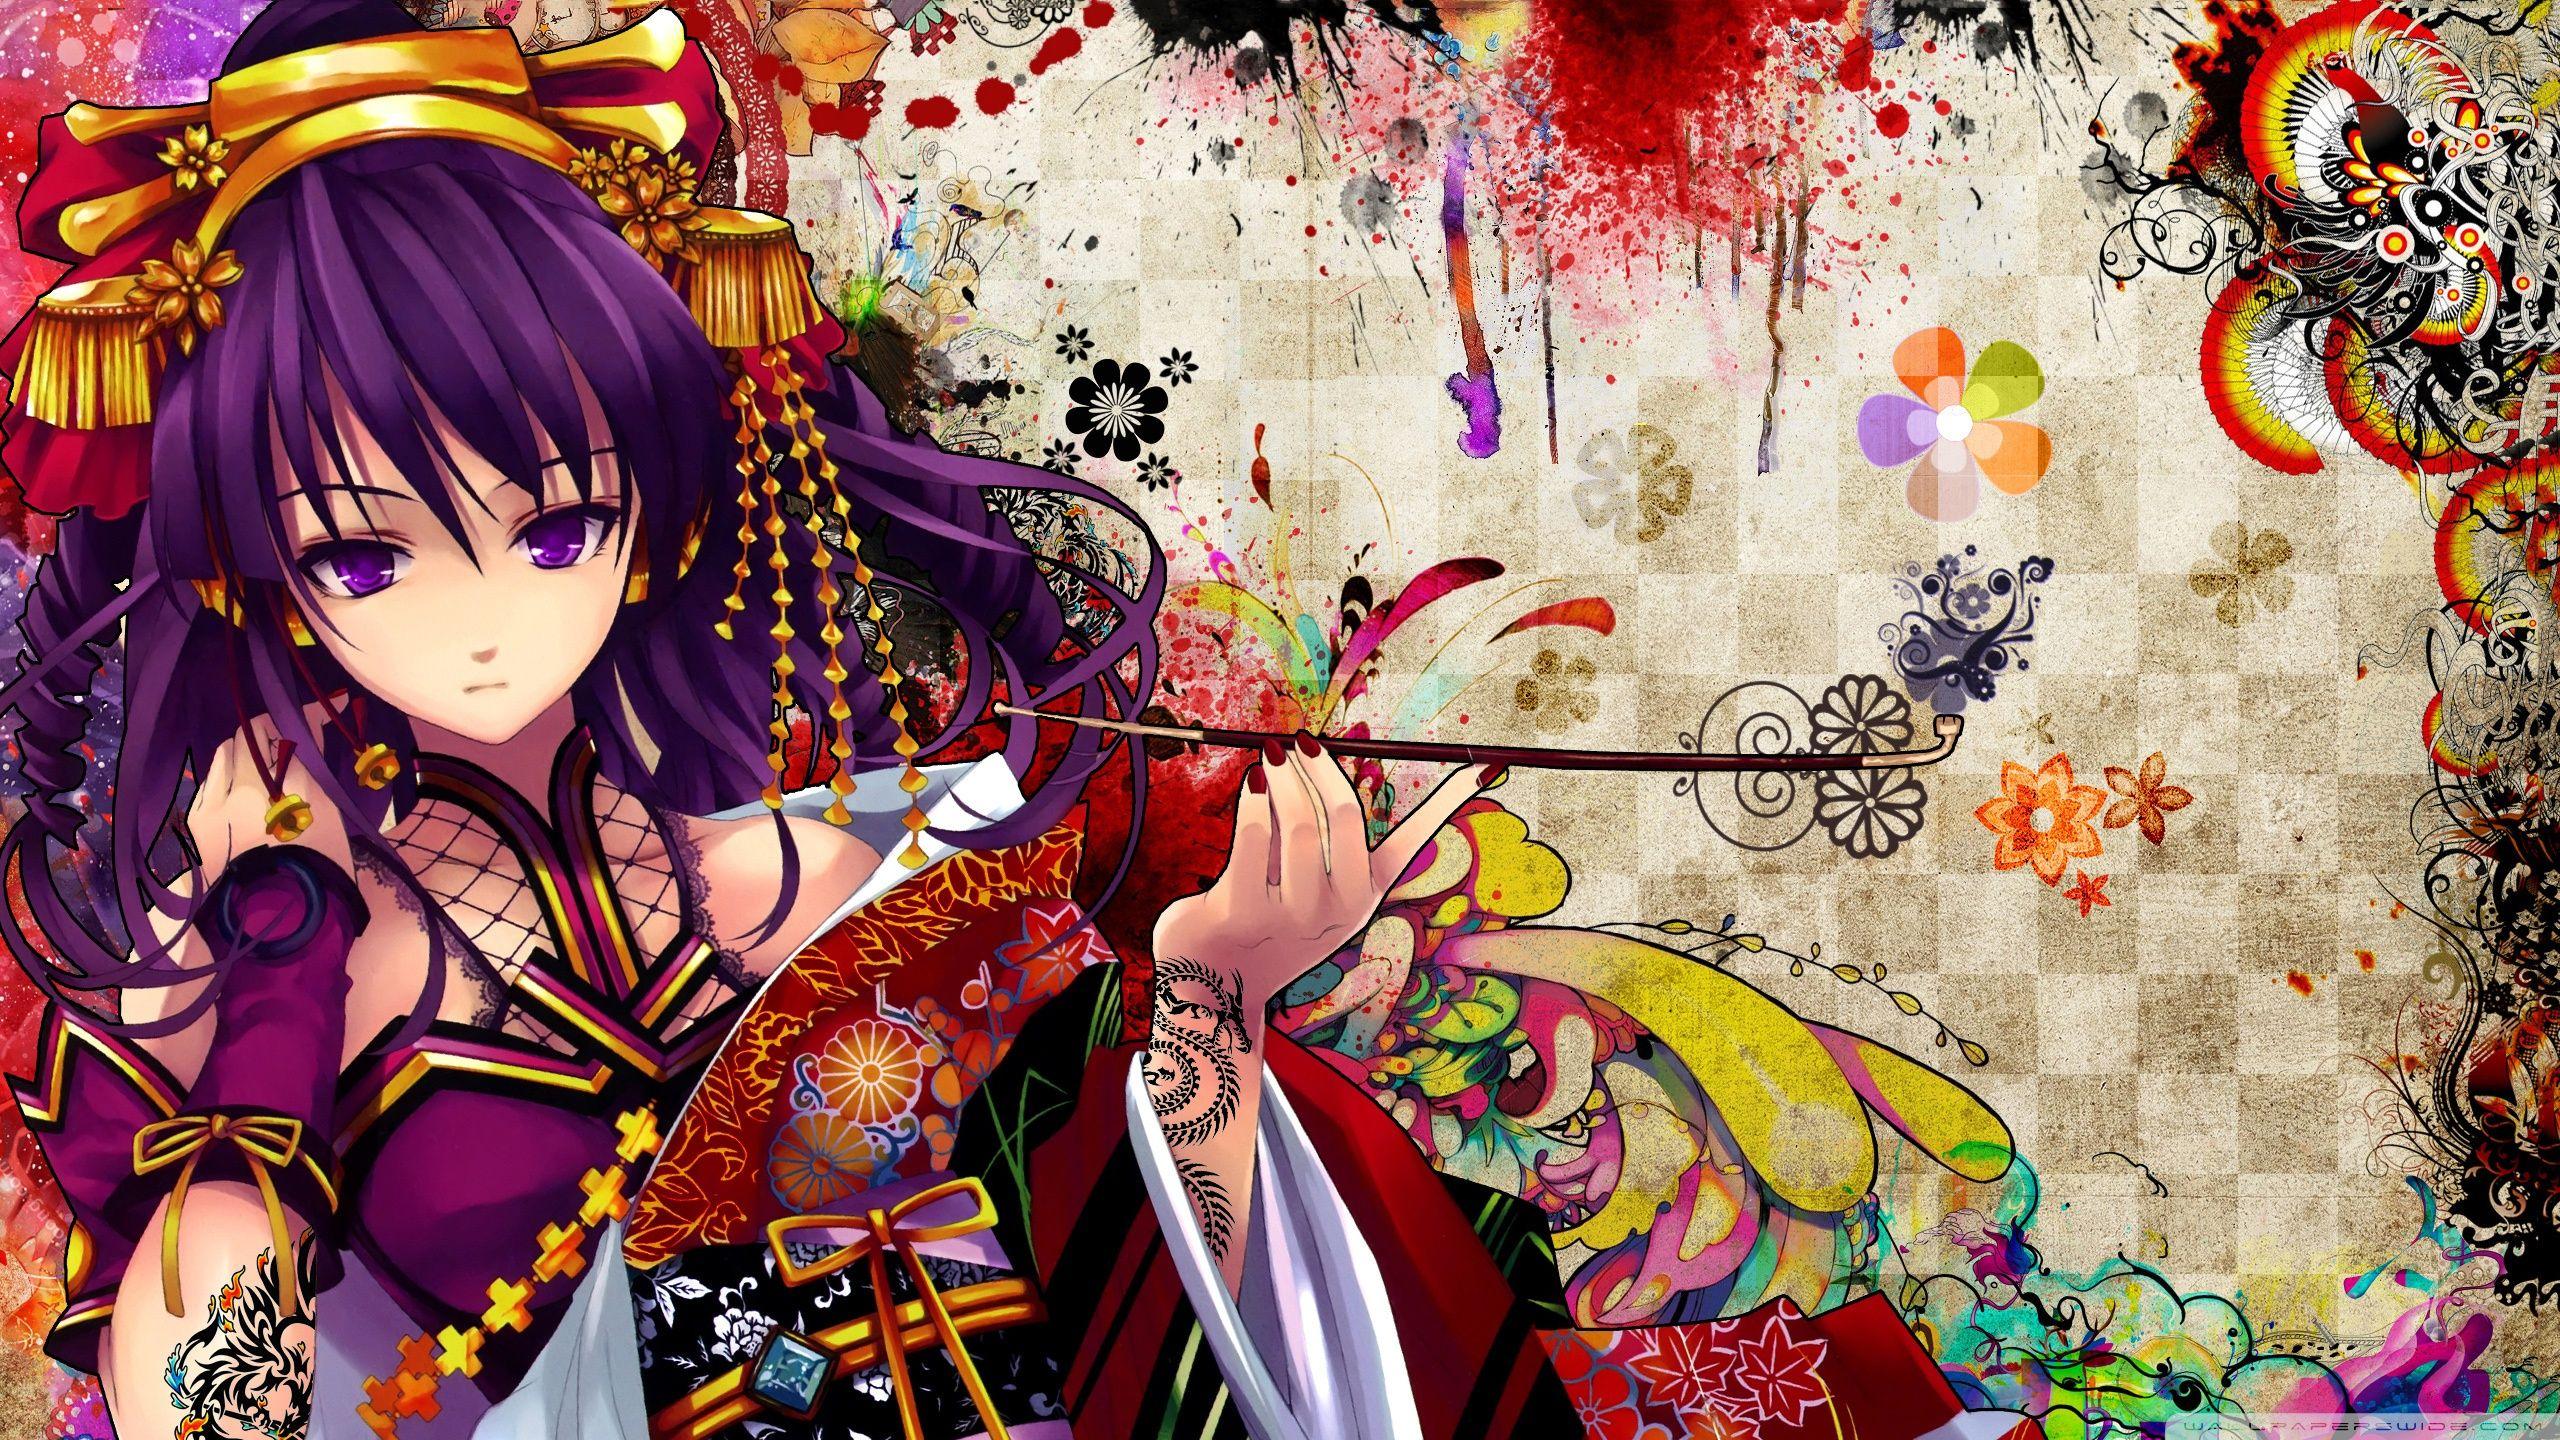 Japanese Anime Widescreen HD Wallpapers - Top Free Japanese Anime ...